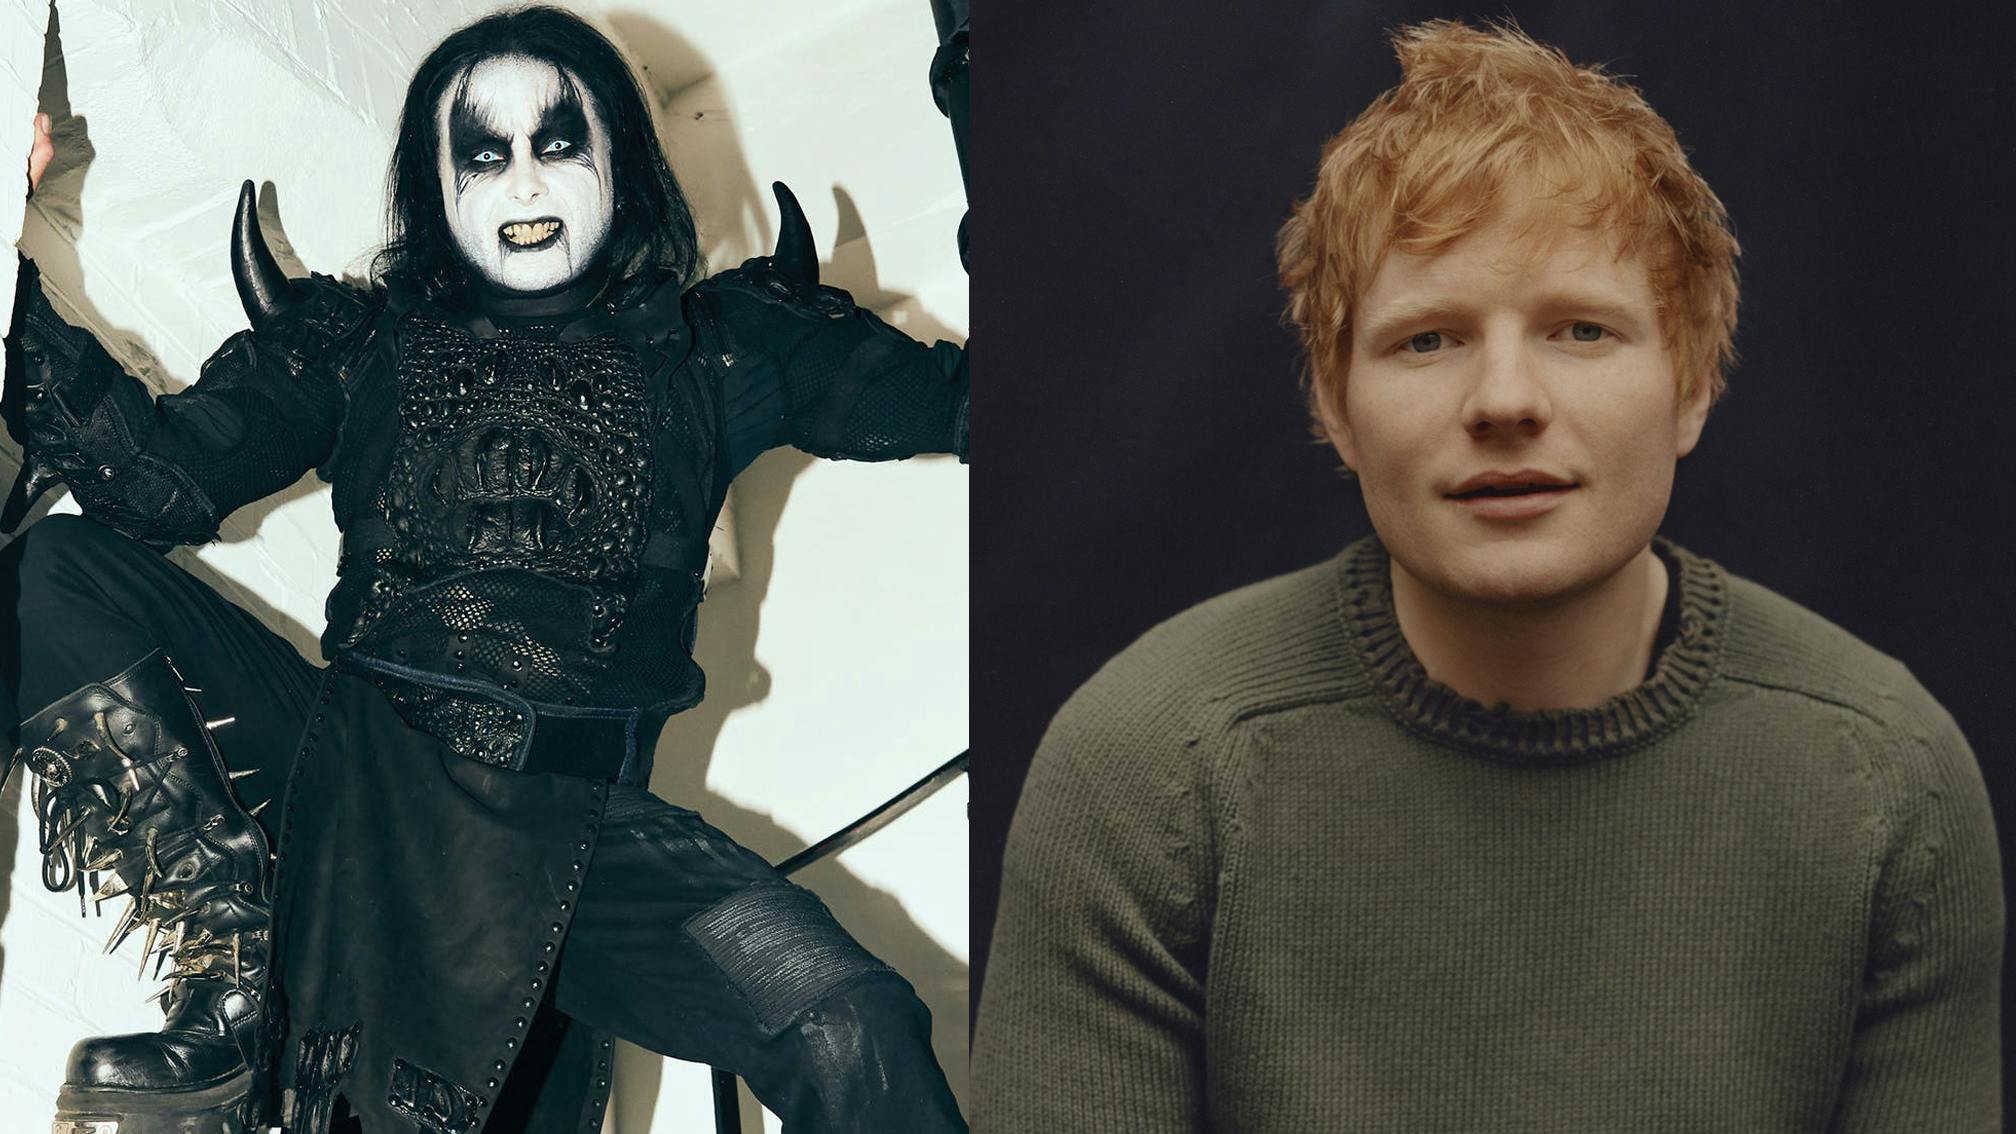 Dani Filth confirms potential Ed Sheeran collab: "I've been invited up to his place"